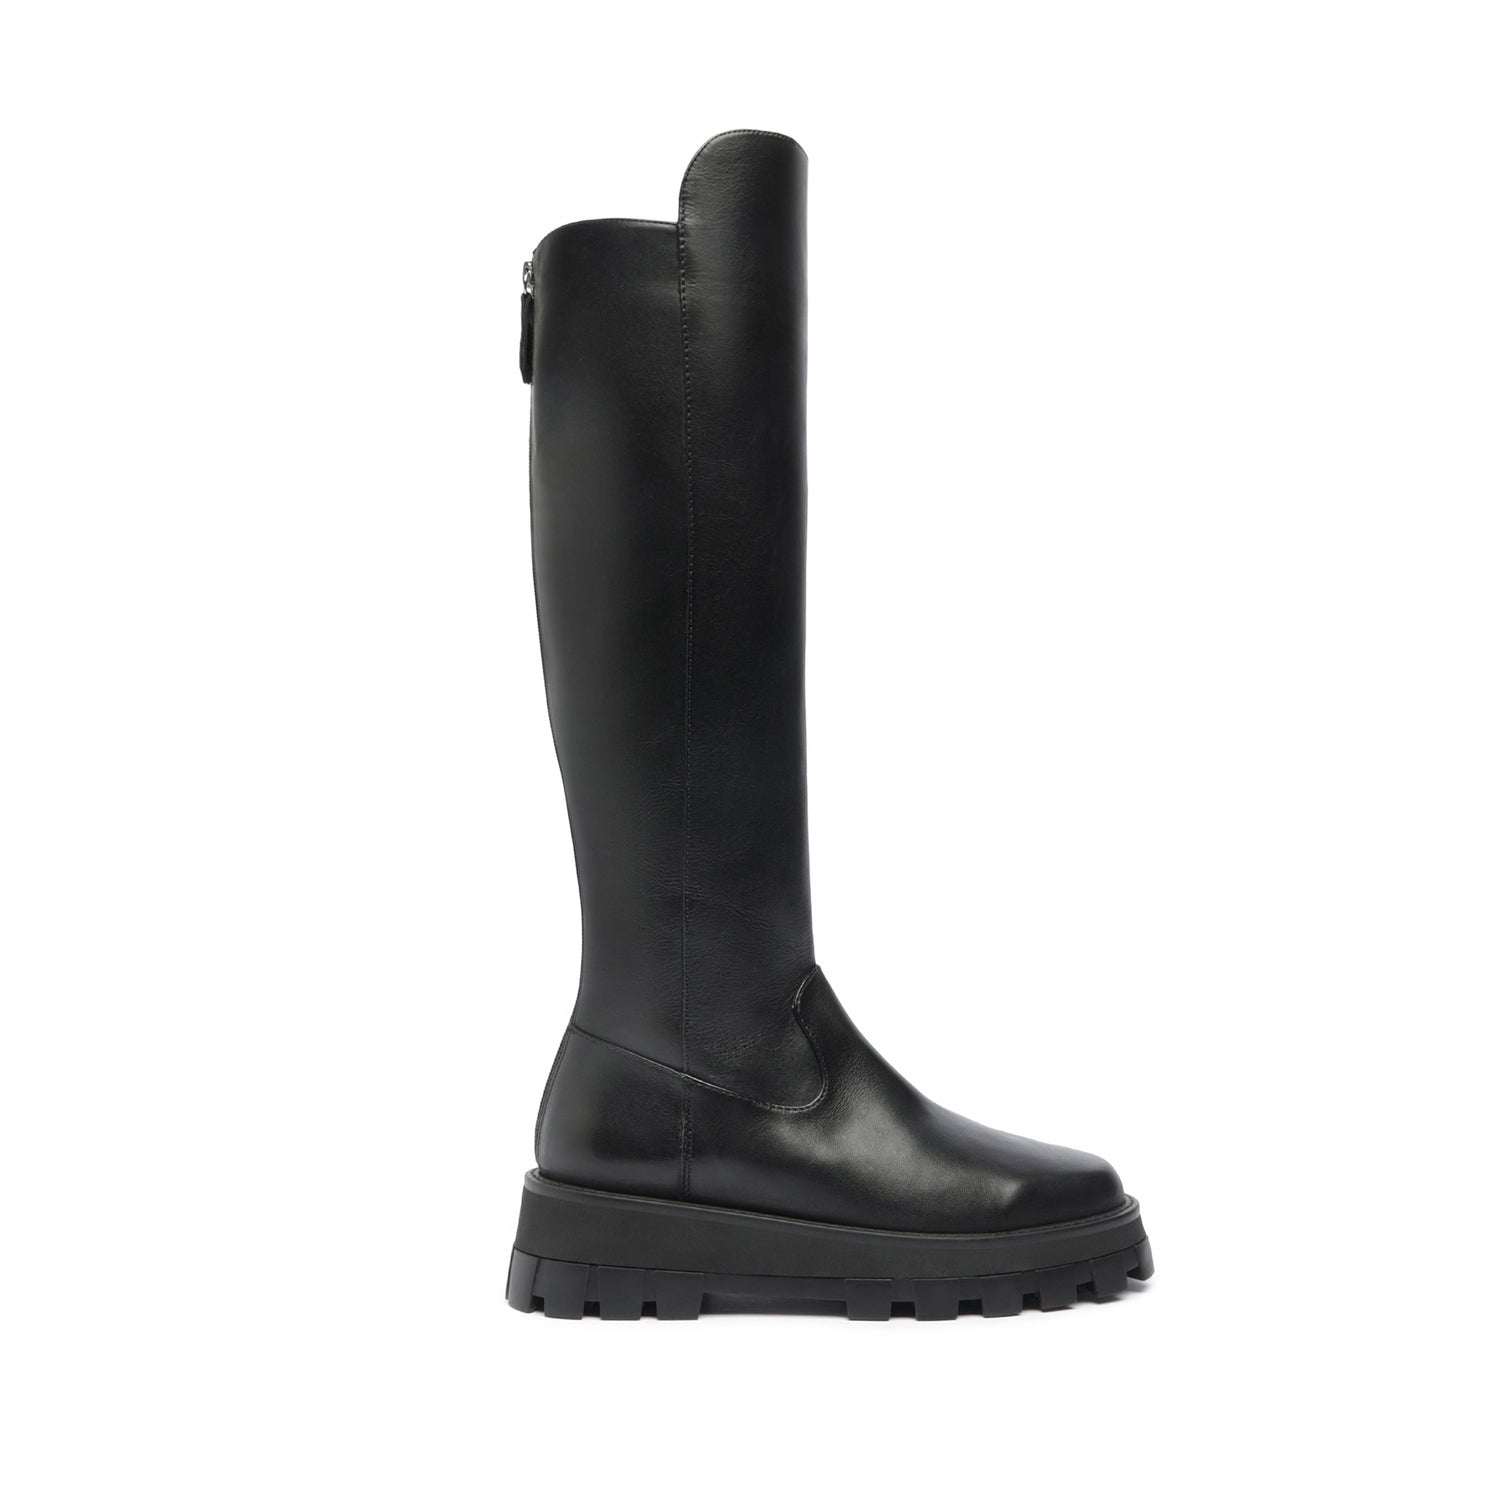 Gardienne Leather Boot Boots Open Stock 5 Black Leather - Schutz Shoes